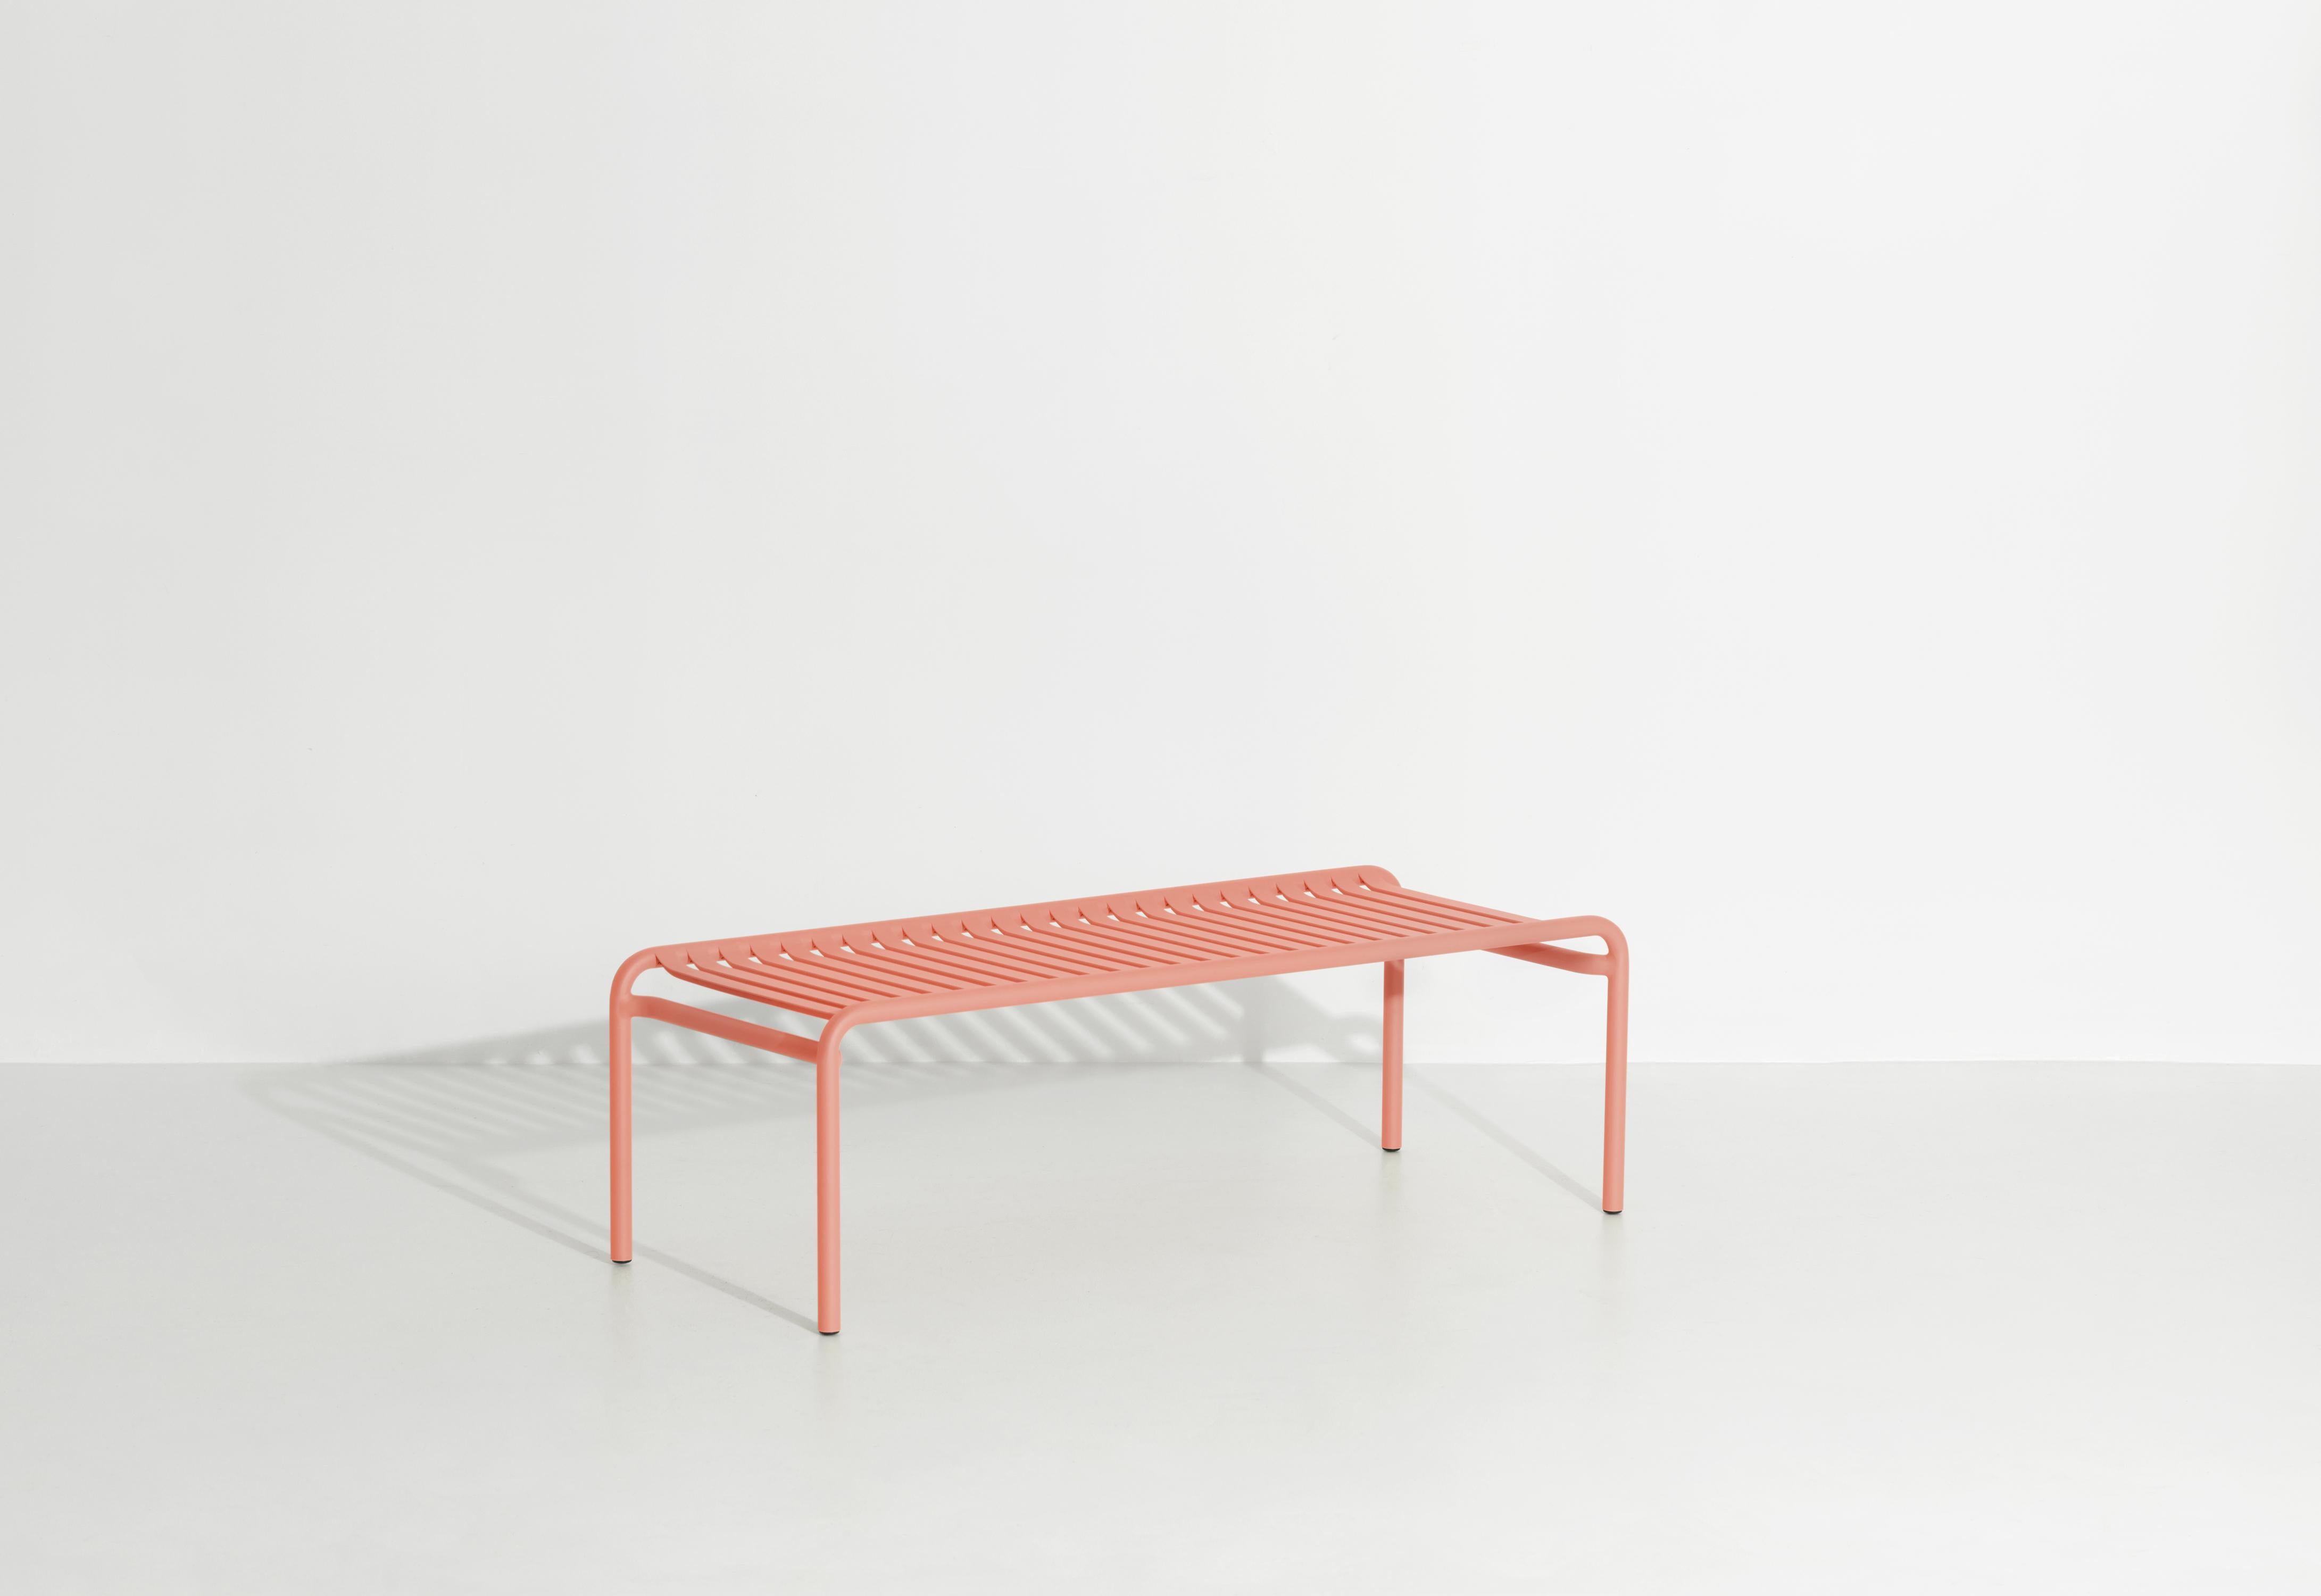 Petite Friture Week-End Long Coffee Table in Coral Aluminium by Studio BrichetZiegler, 2017

The week-end collection is a full range of outdoor furniture, in aluminium grained epoxy paint, matt finish, that includes 18 functions and 8 colours for